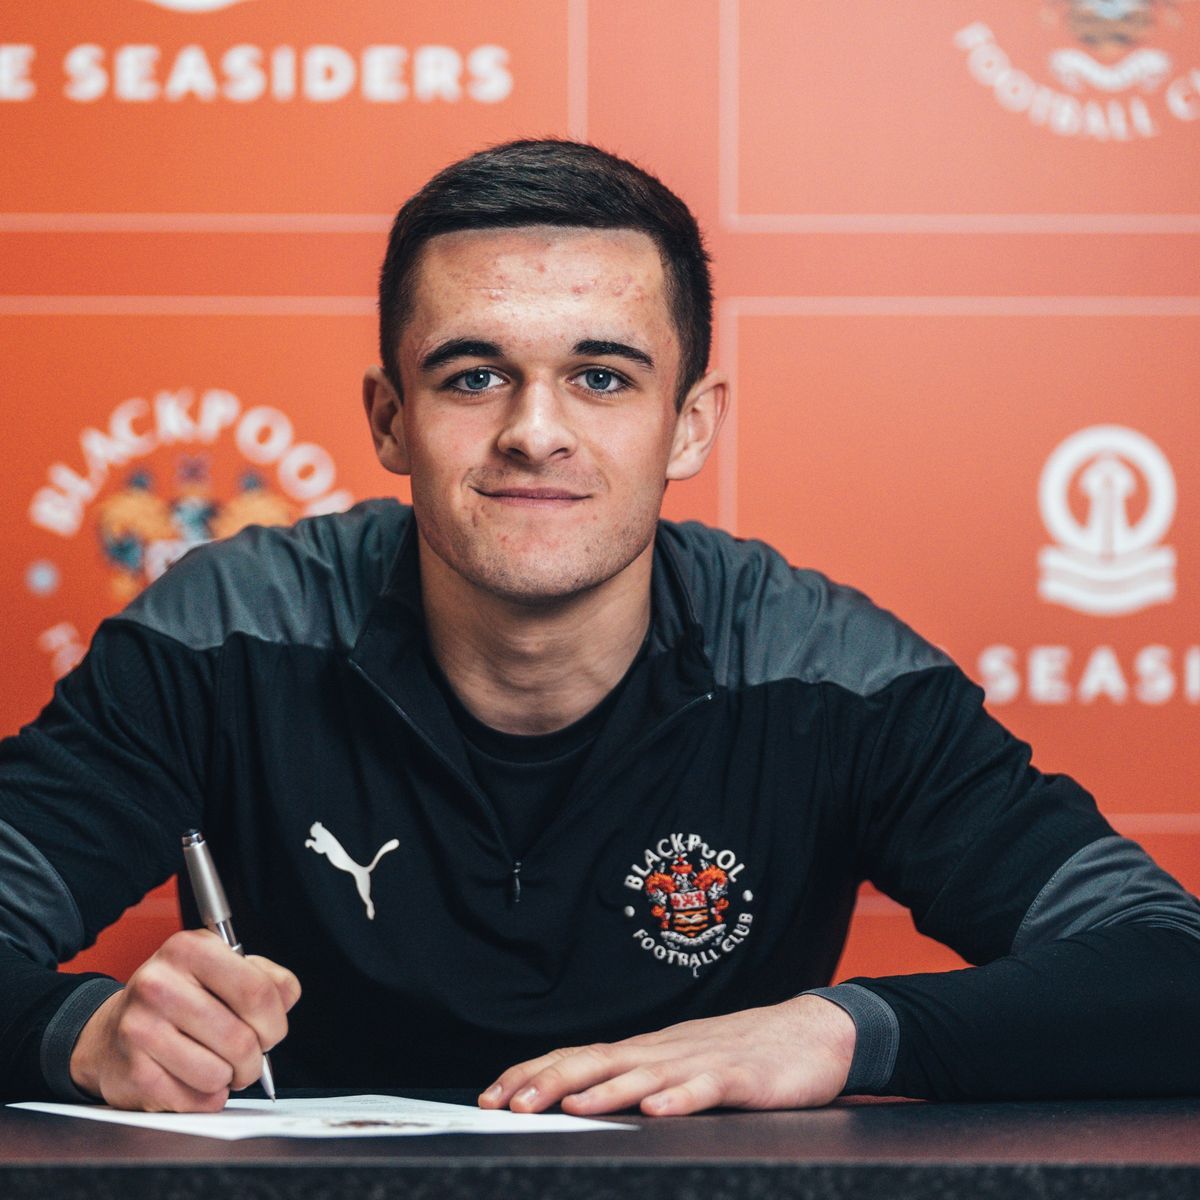 Jack Daniels signed his first professional contract with Blackpool.